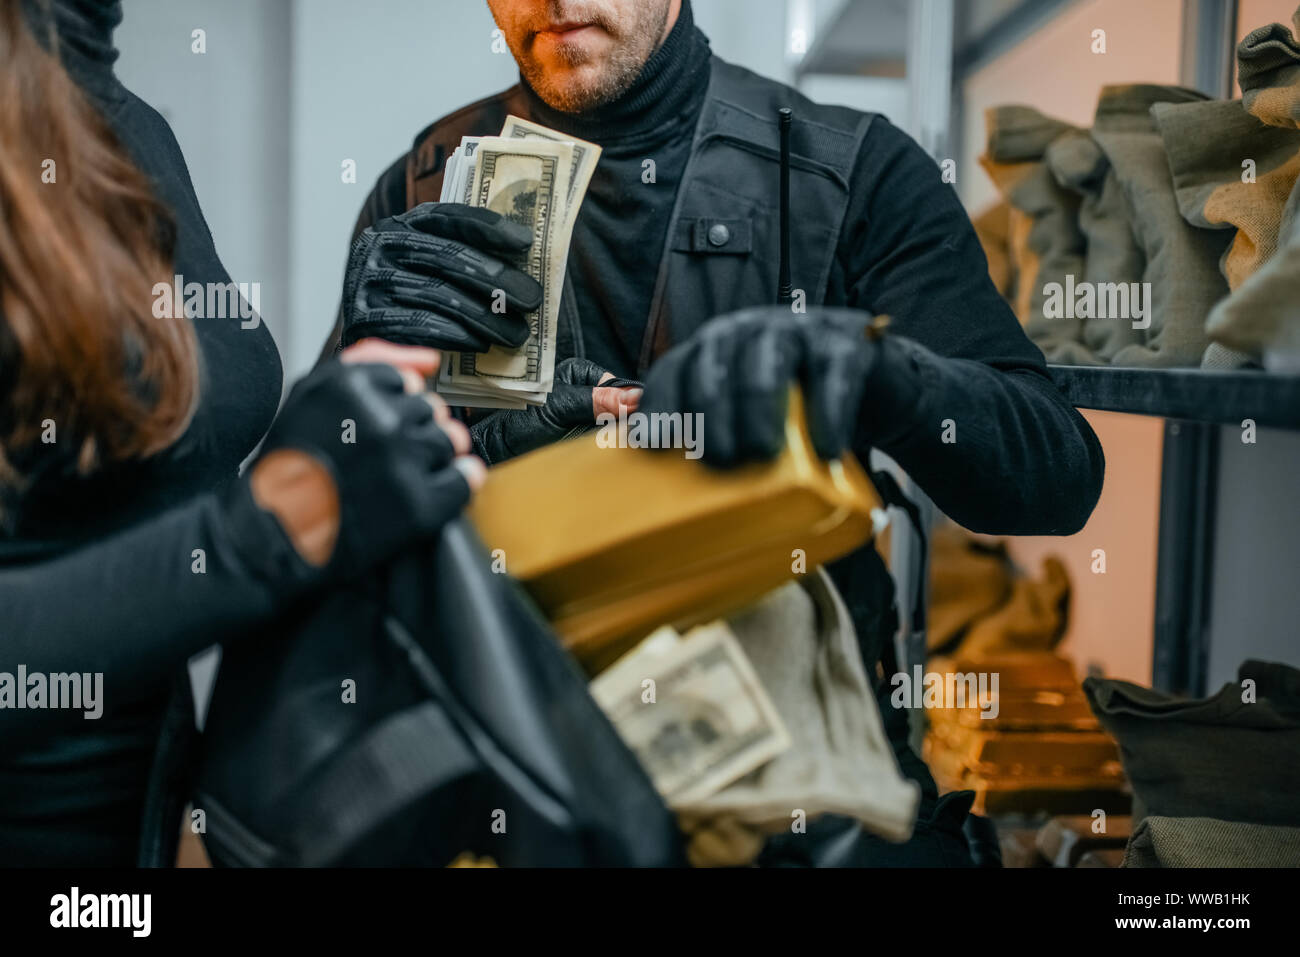 Bank robbery of the century, robbers hacked vault Stock Photo